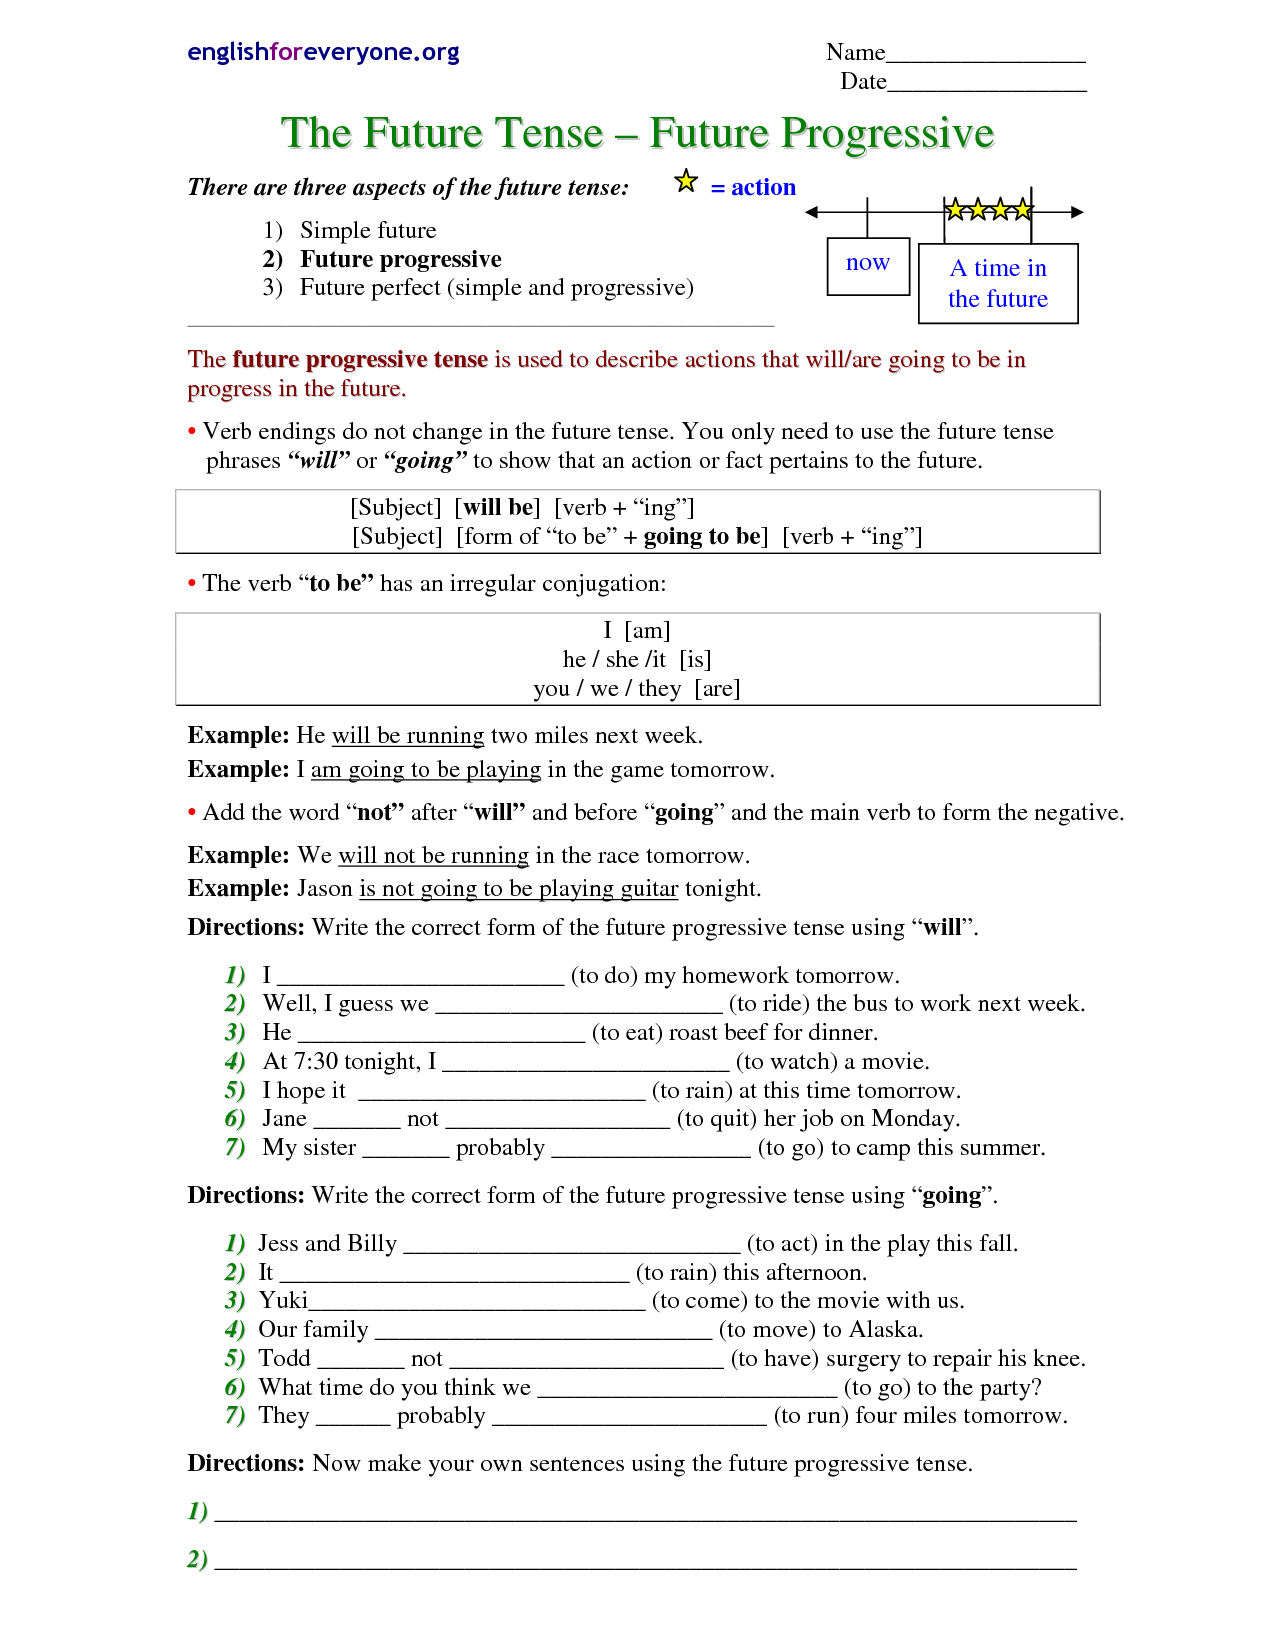 17-best-images-of-perfect-and-progressive-tense-worksheets-present-perfect-continuous